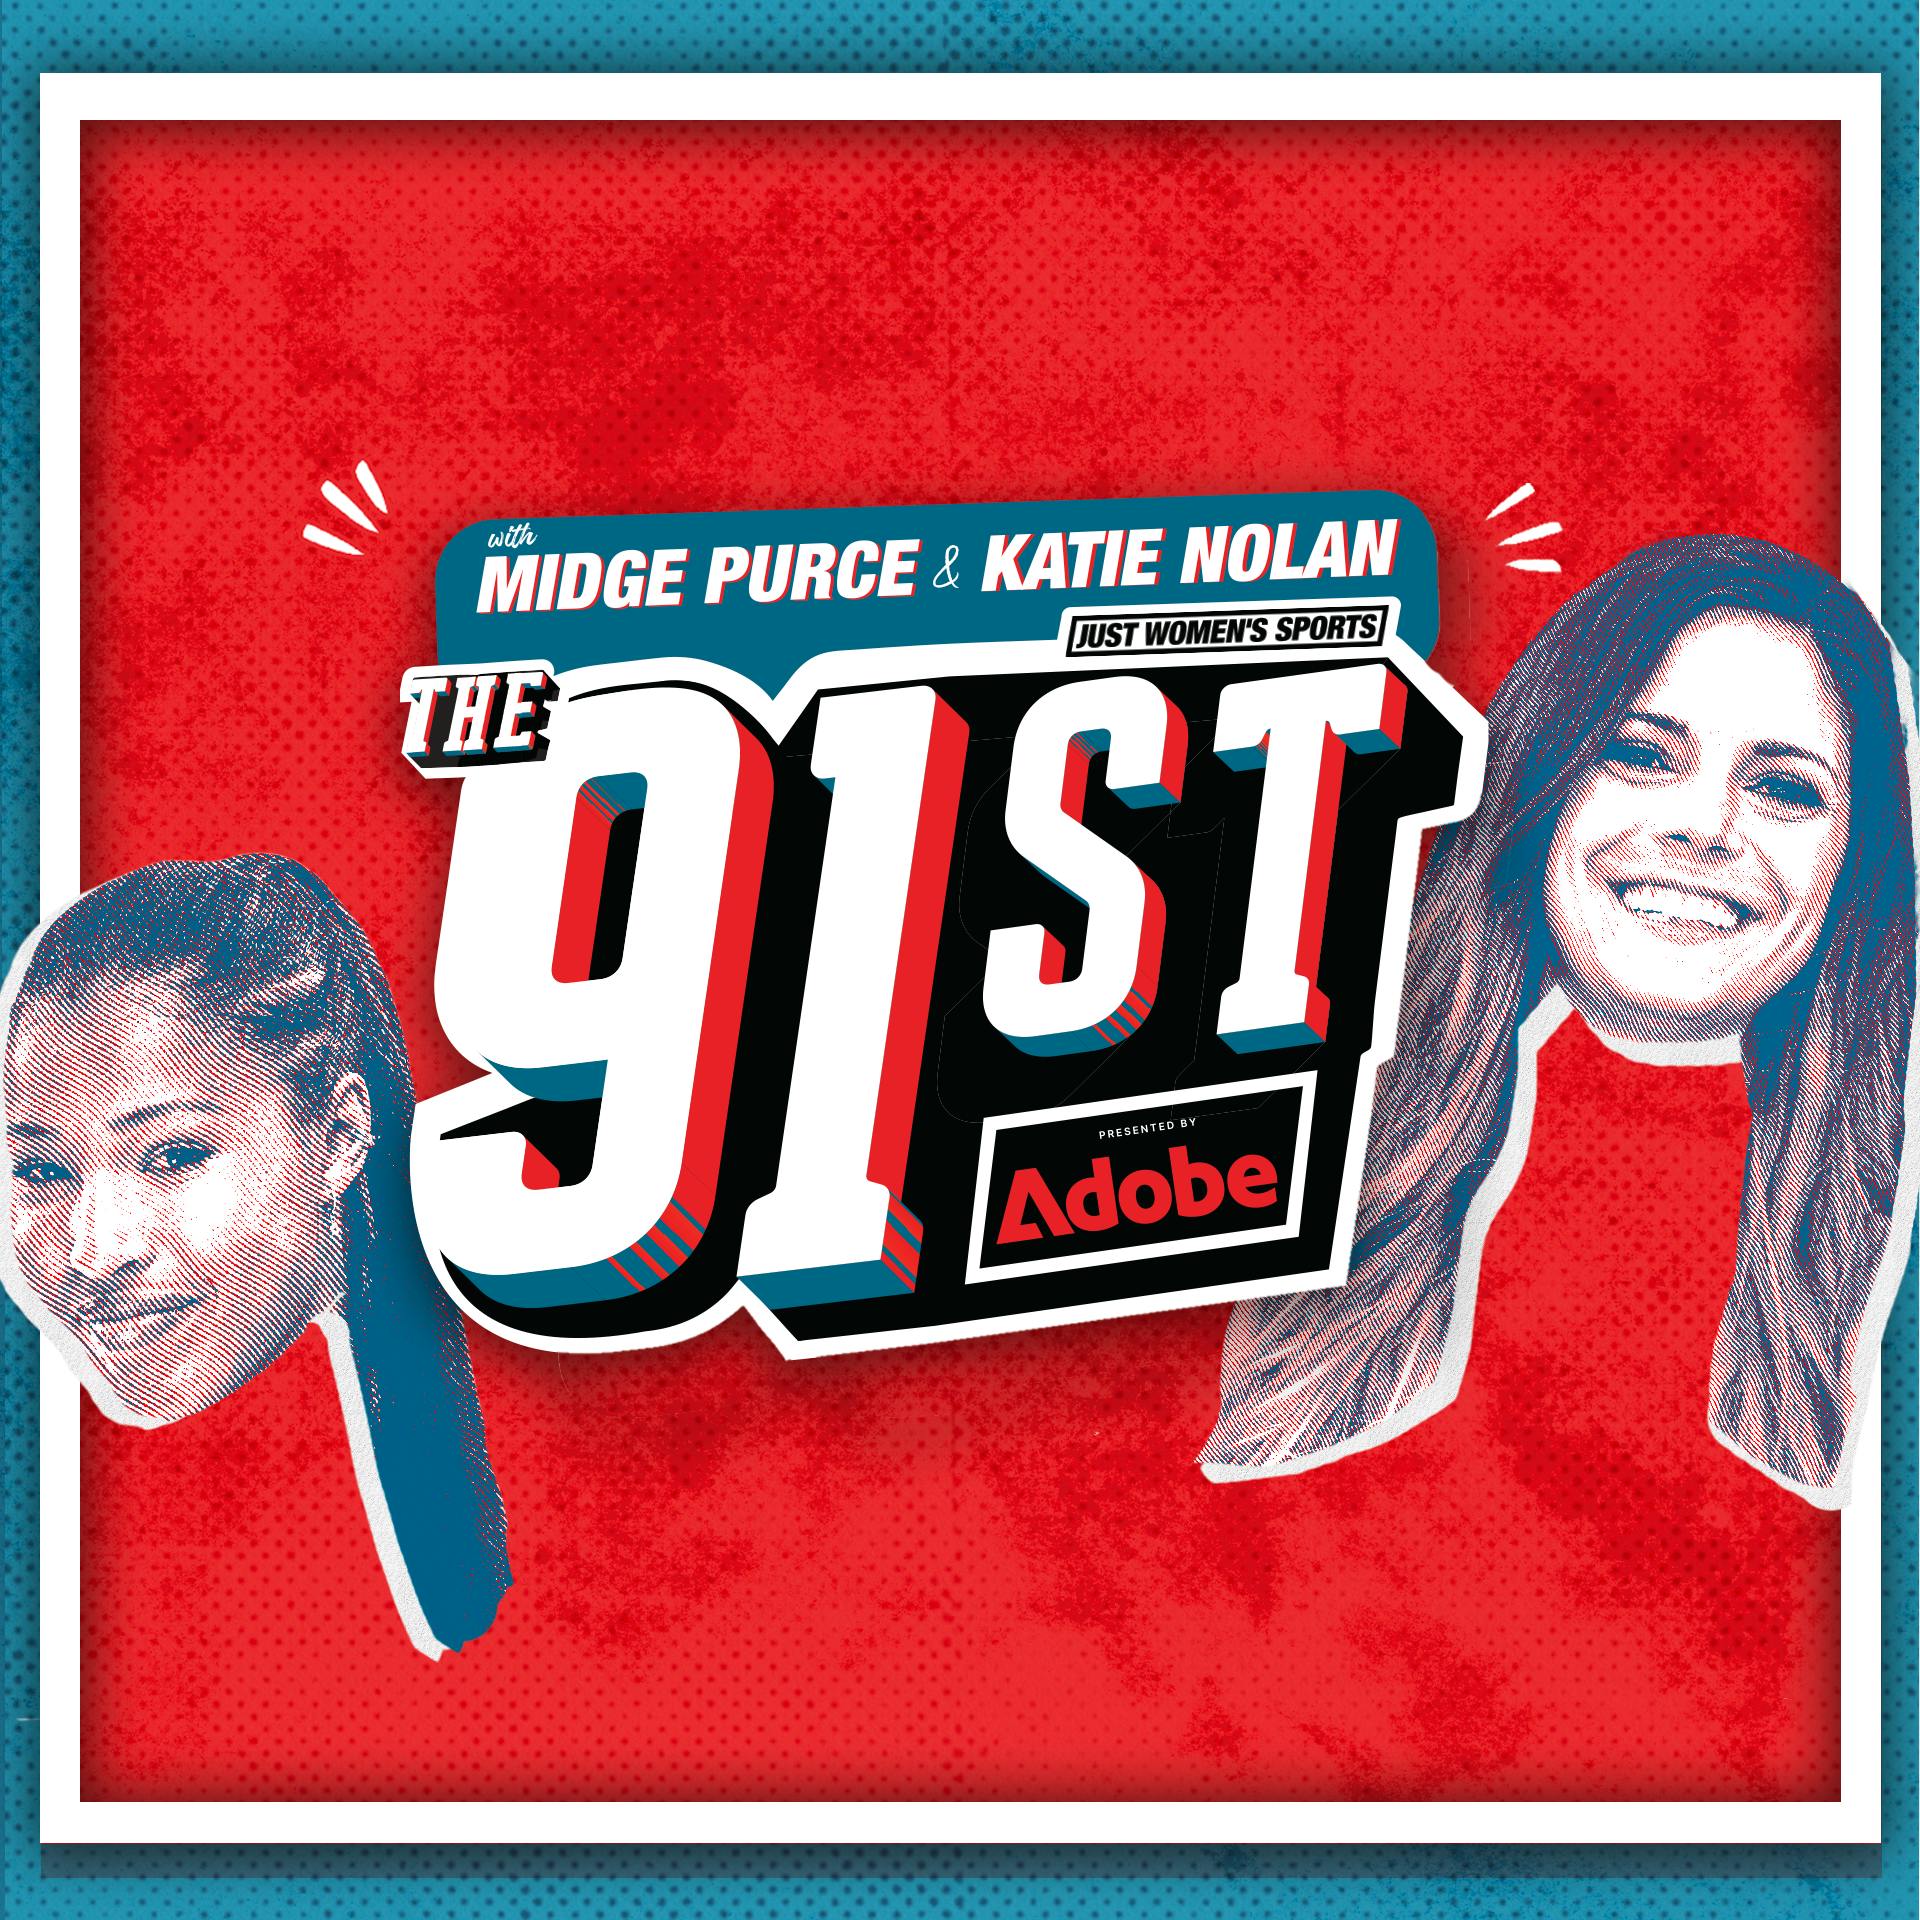 Post-Portugal with AD Franch | The 91st with Midge Purce and Katie Nolan presented by Adobe